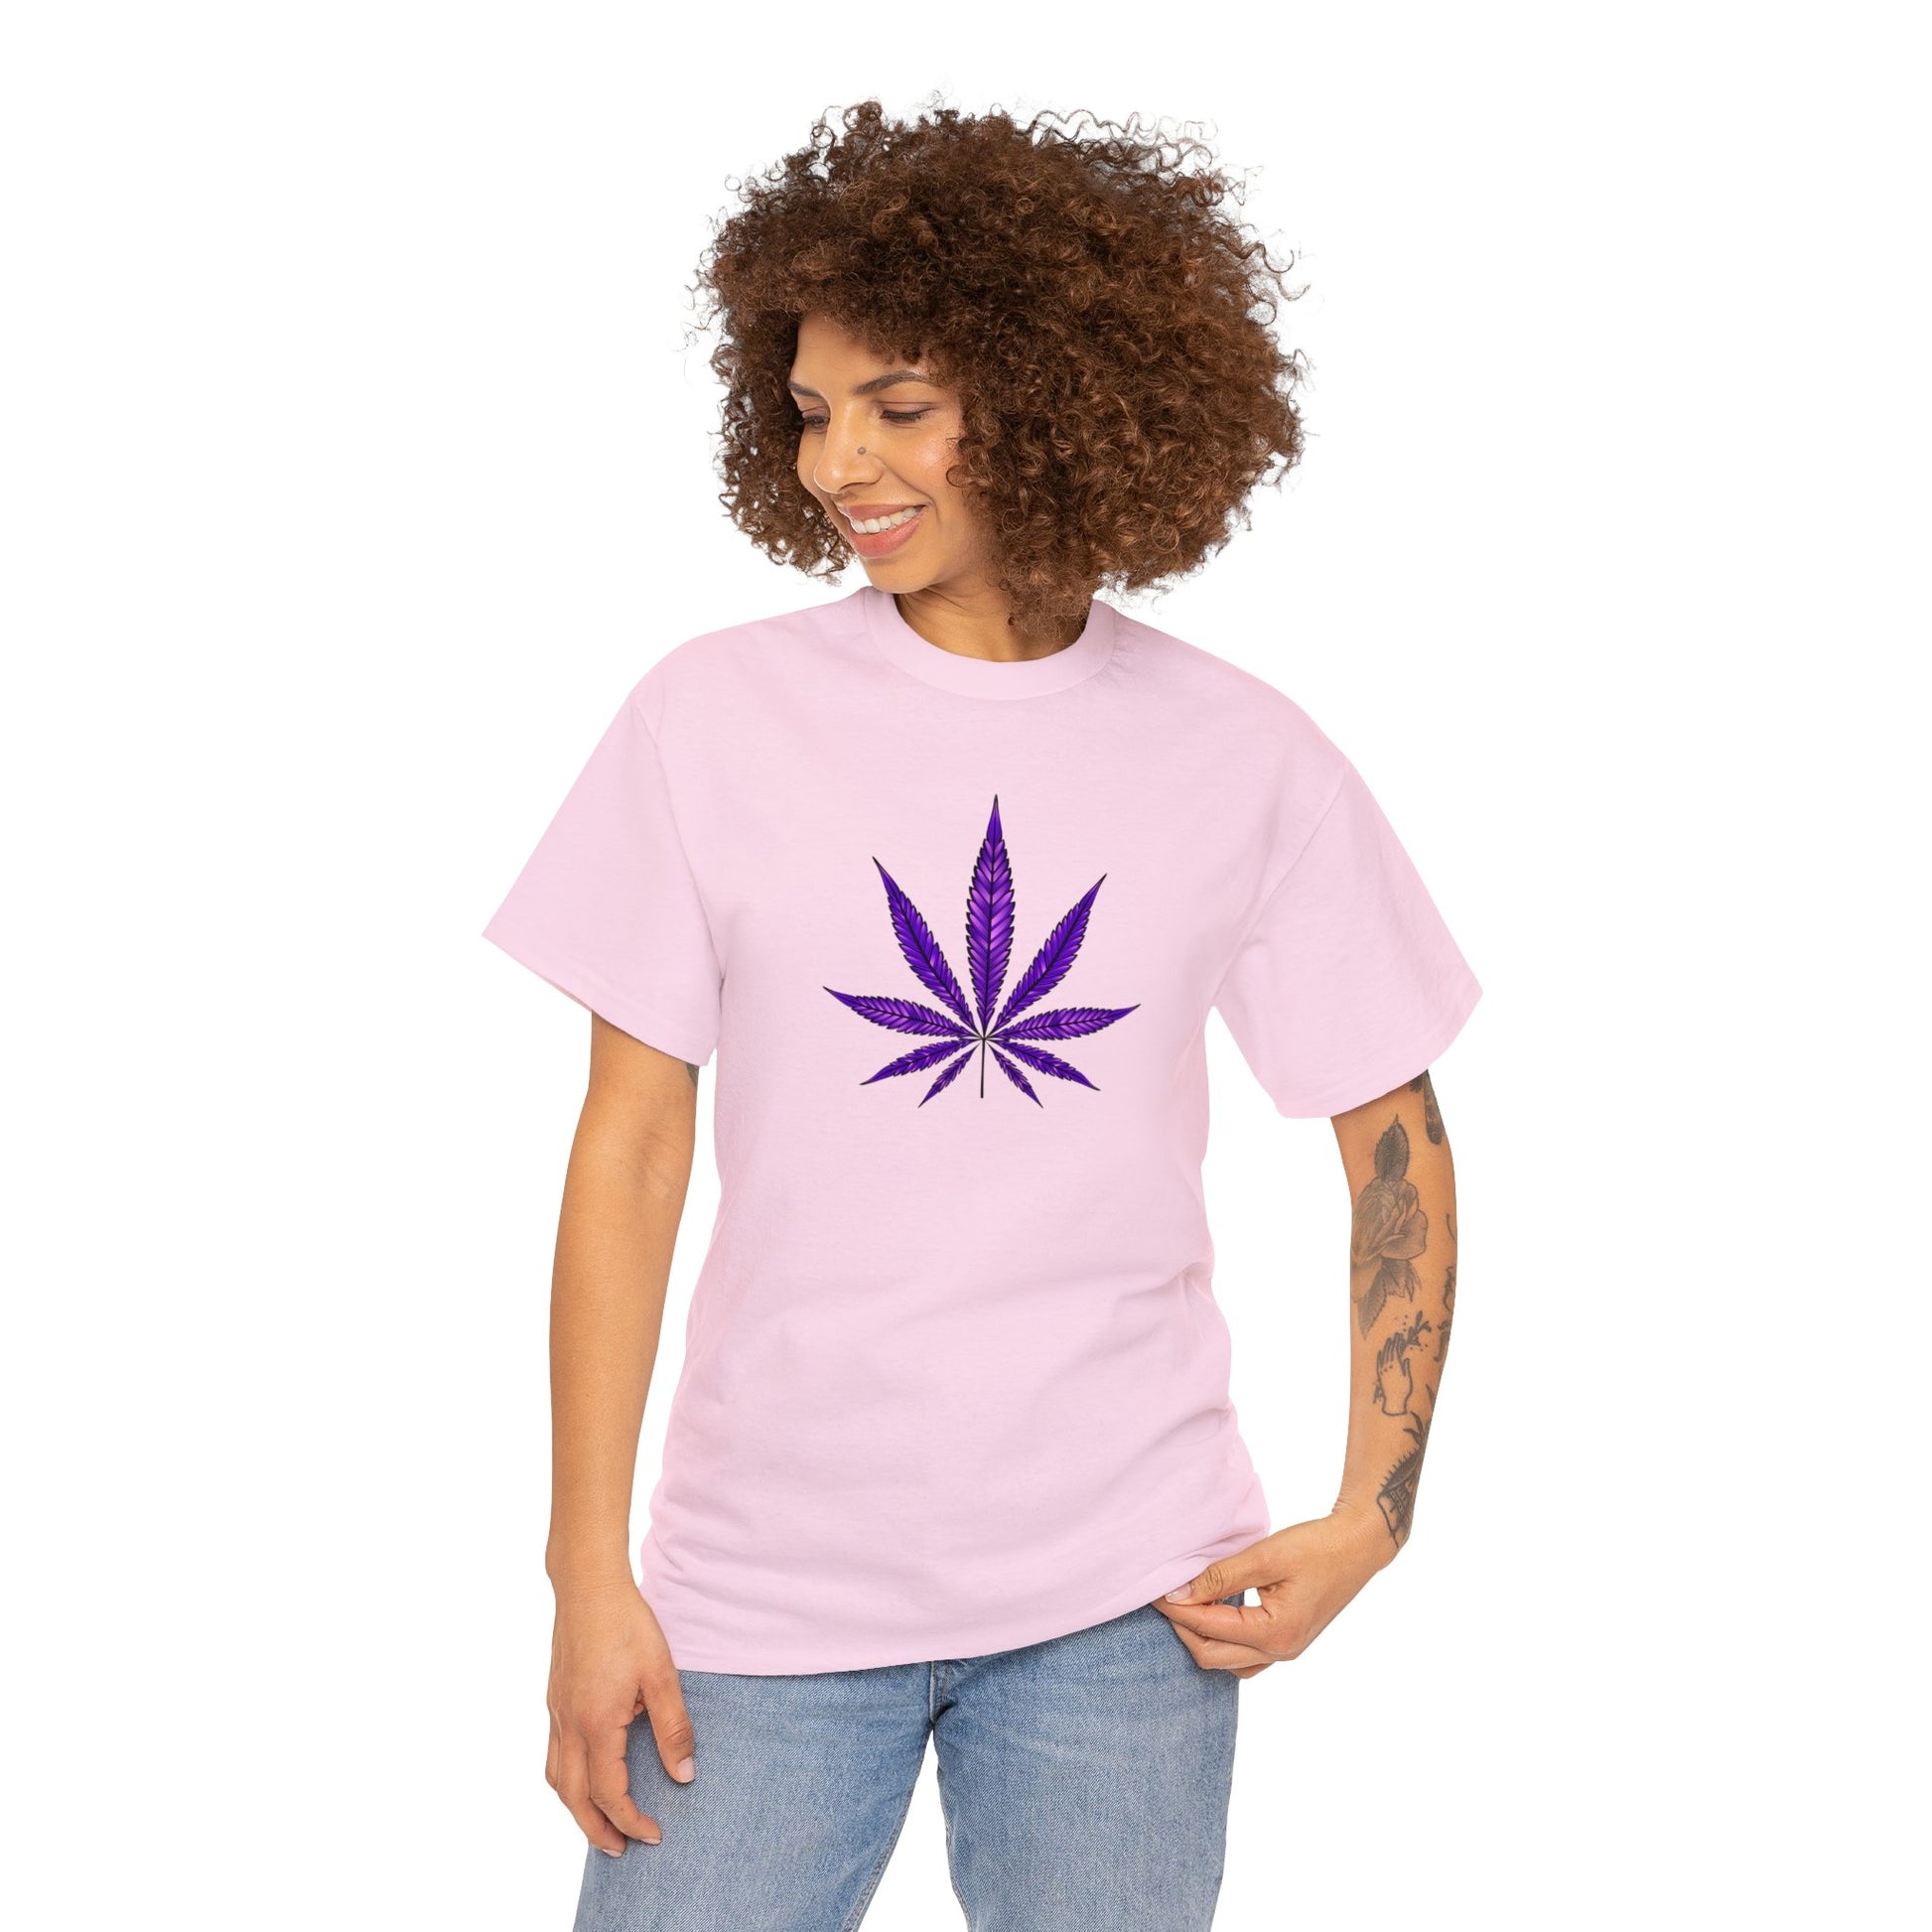 A woman with curly hair wearing a vibrant Purple Cannabis Leaf Tee.